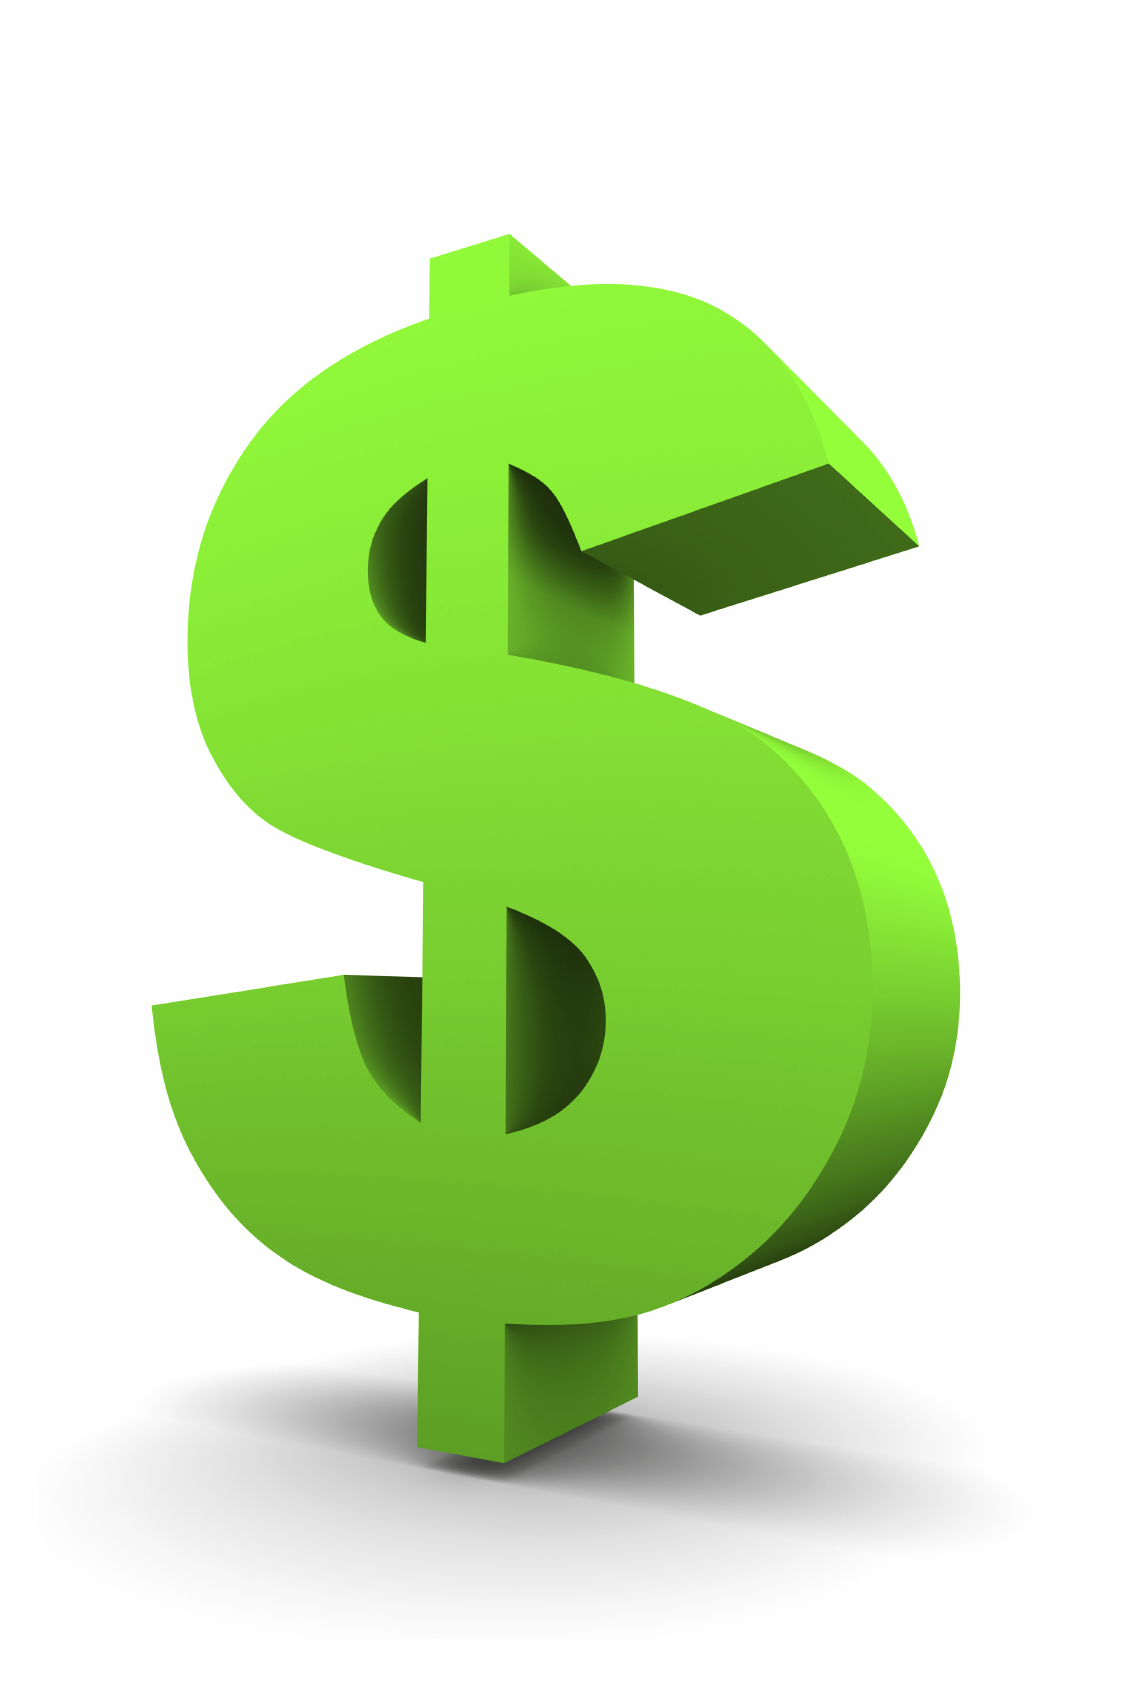 Wallpapers For > Dollar Sign Icon Transparent Background